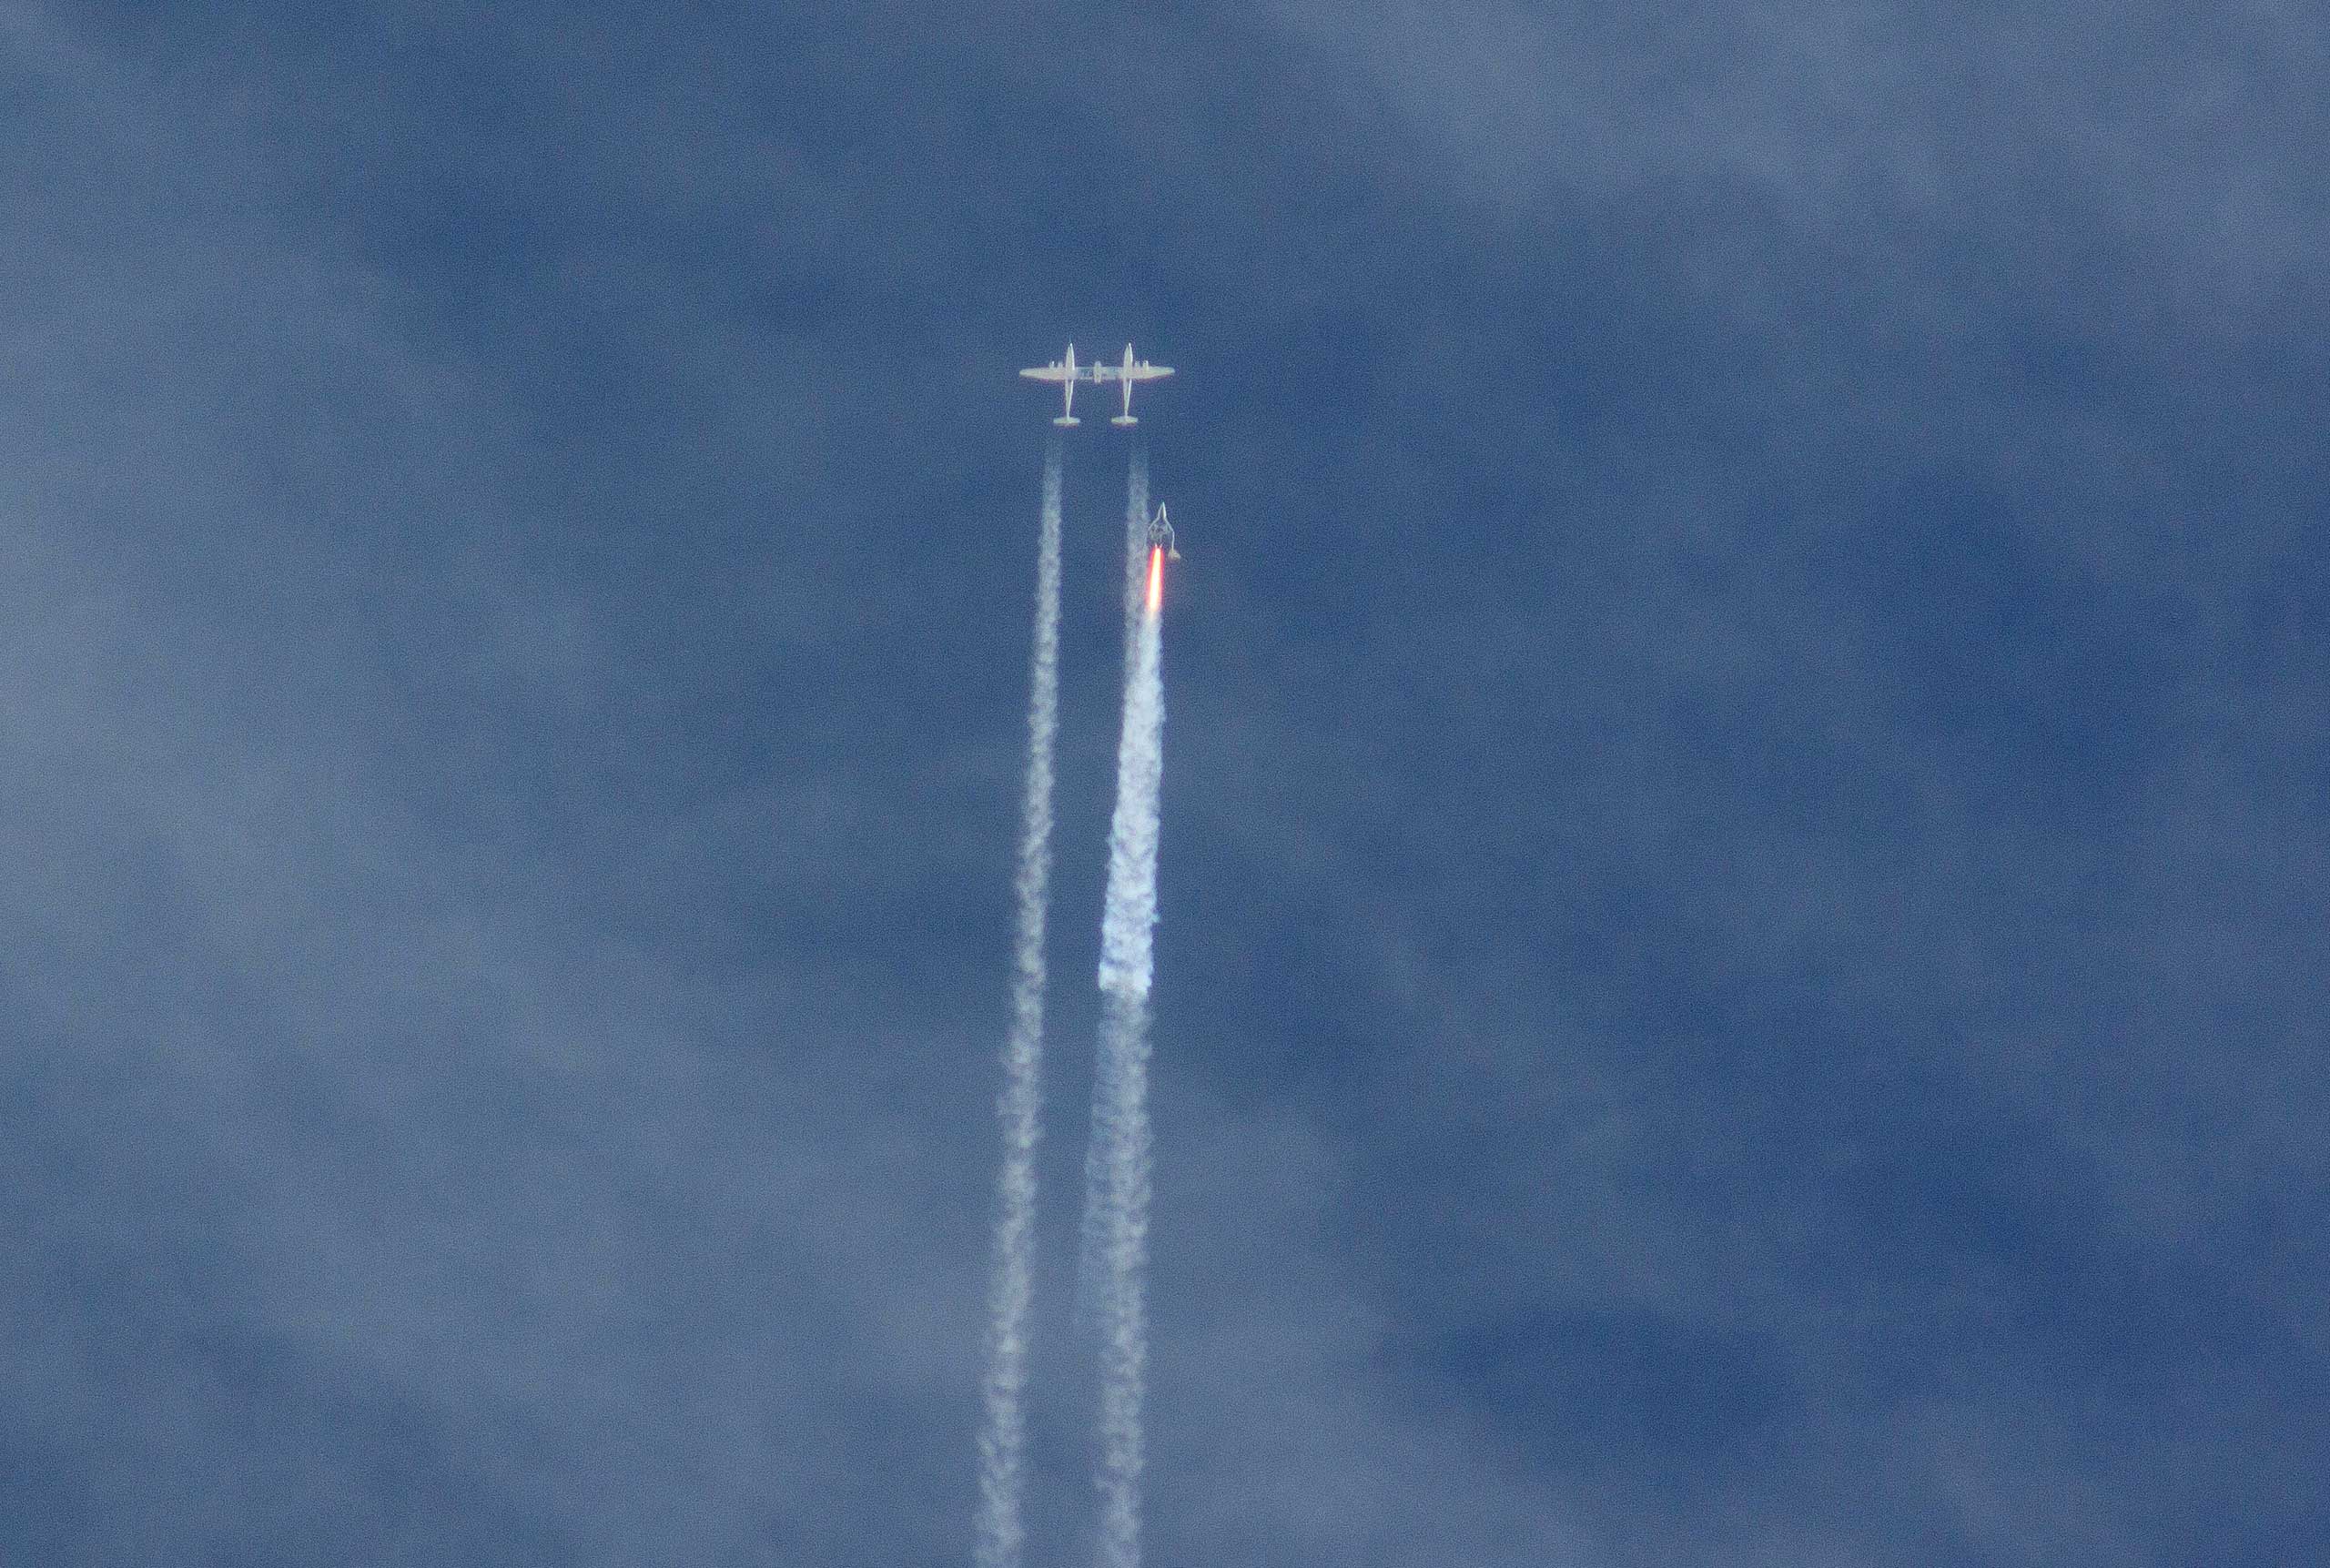 Oct. 31, 2014. The Virgin Galactic SpaceShipTwo rocket separates from the carrier aircraft prior to it exploding in the air during a test flight. The explosion killed a pilot aboard and seriously injured another while scattering wreckage in Southern California's Mojave Desert.